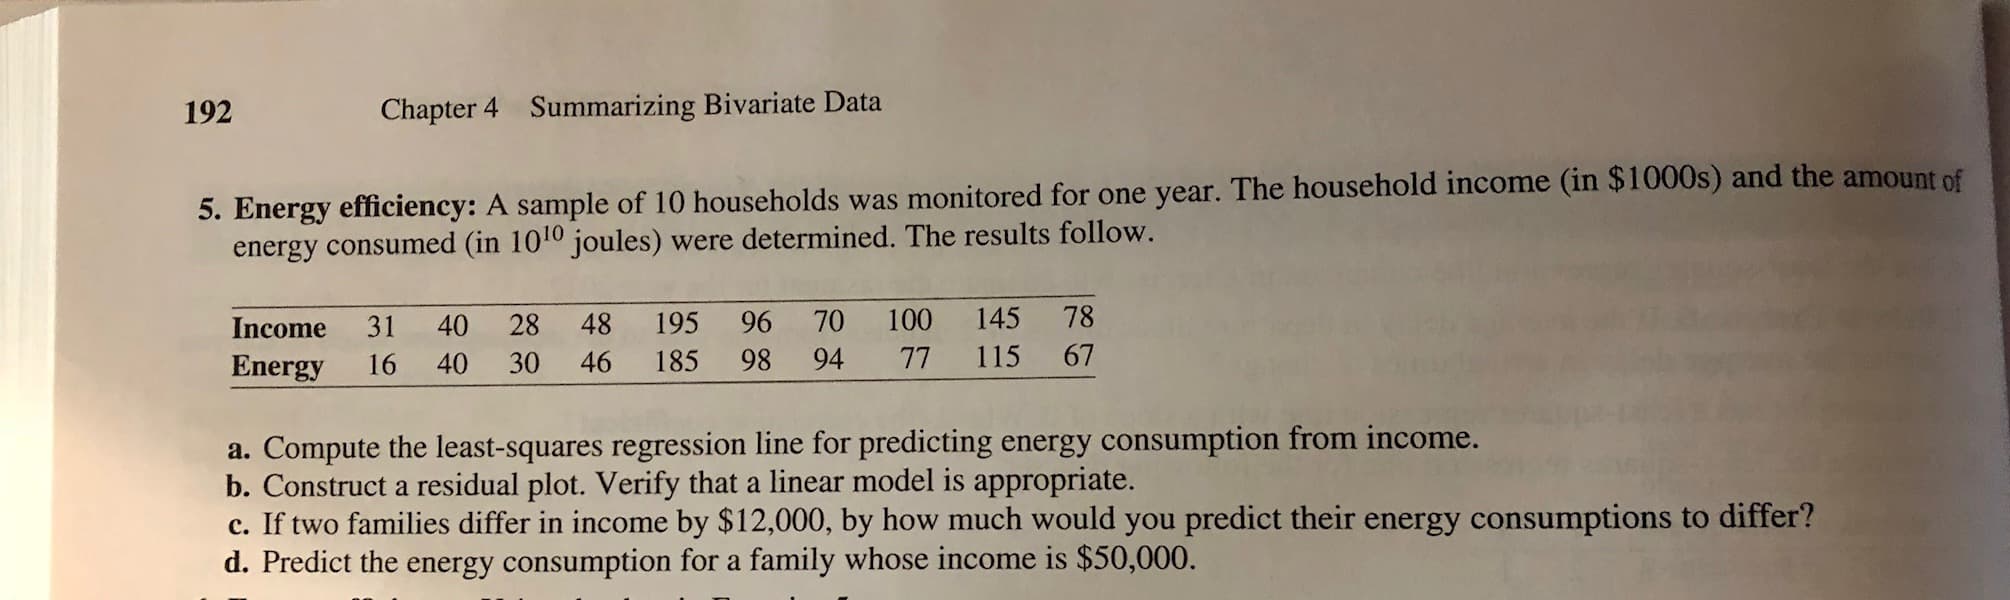 192
Chapter 4
Summarizing Bivariate Data
5. Energy effici
ency: A sample of 10 households was monitored for one year. The household income (in $1000s) and the amount of
energy consumed (in 1010 joules) were determined. The results follow.
Income 31 40 28 48 195 96 70 100 145 78
Energy
16 40 30 46 185 98 94 77 115 67
a. Compute the least-squares regression line for predicting energy consumption from income.
b. Construct a residual plot. Verify that a linear model is appropriate.
c. If two families differ in income by $12,000, by how much would you predict their energy consumptions to differ?
d. Predict the energy consumption for a family whose income is $50,000.
